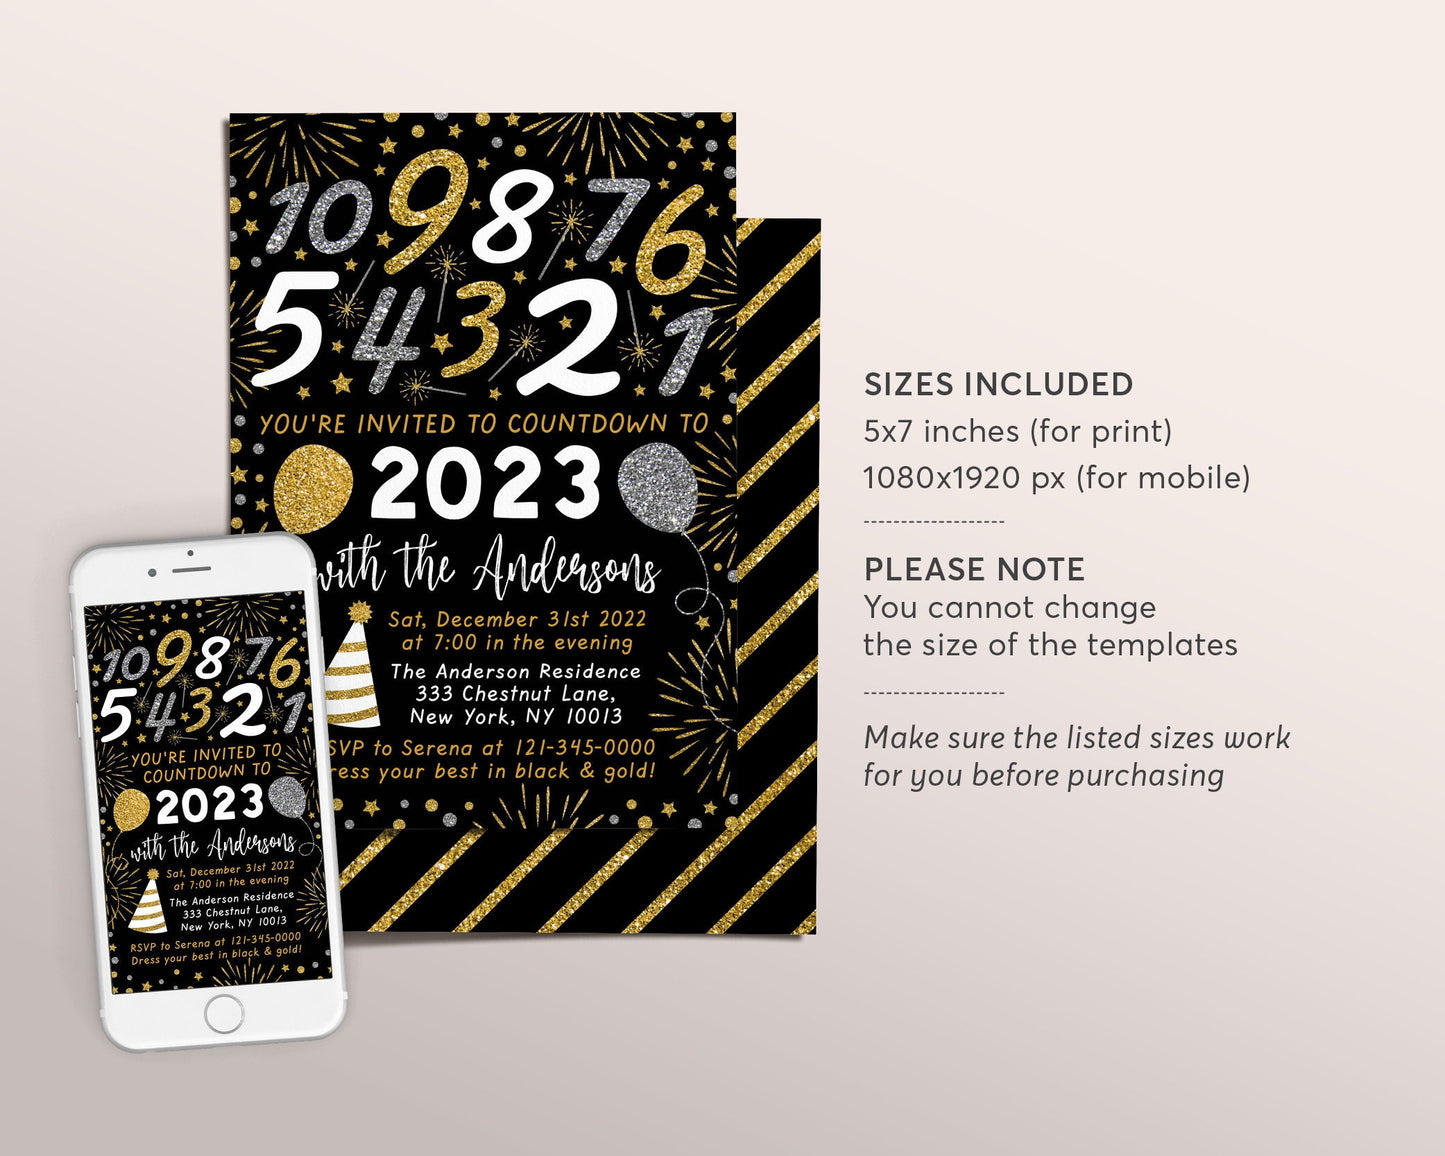 New Years Eve Countdown Party Invitation Editable Template, Adult NYE Holiday Party Invite Printable, Gold Glitter Black Cocktail Evite